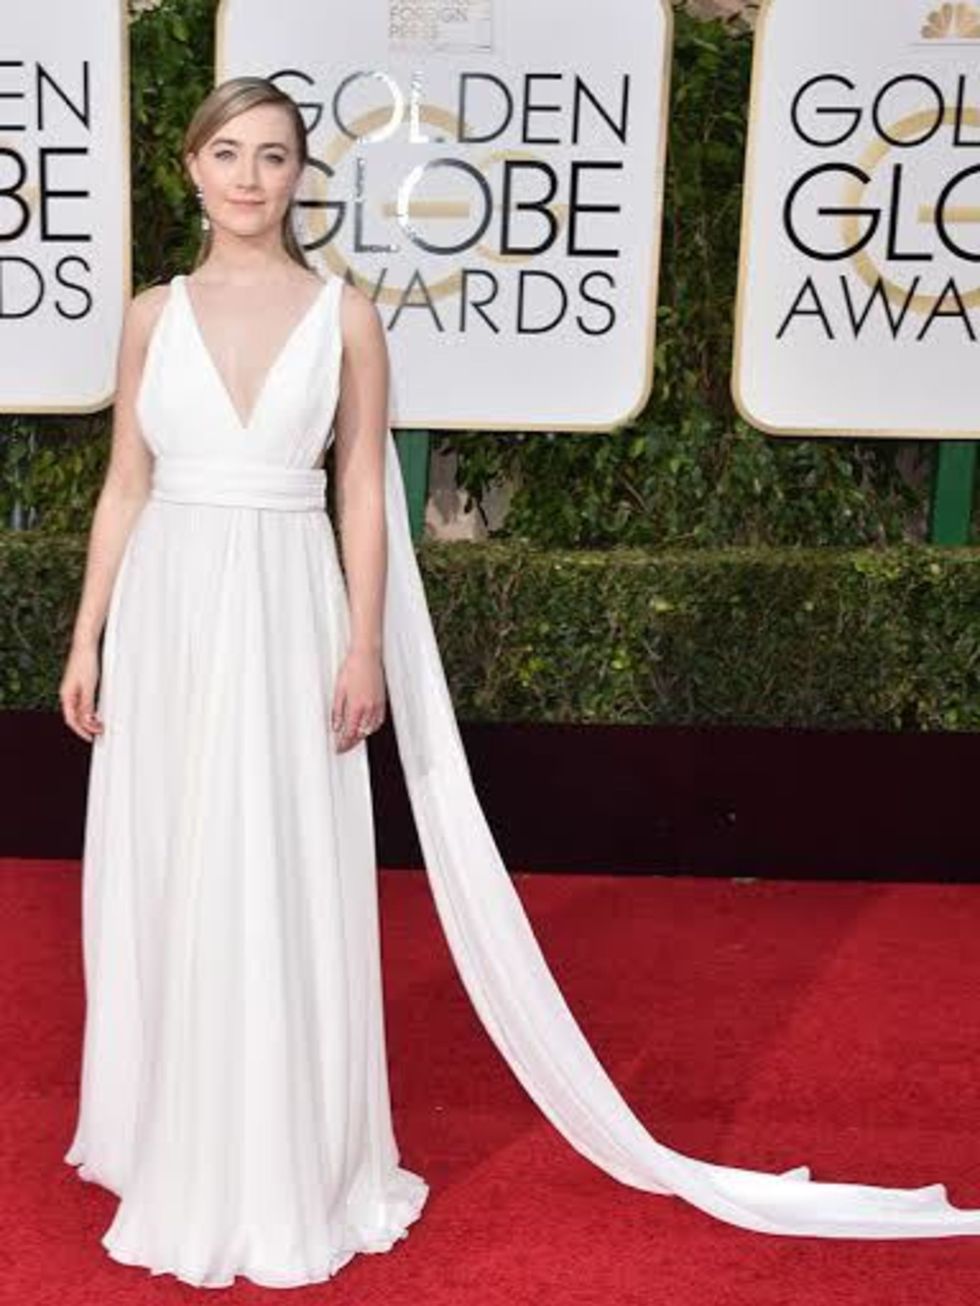 <p>Saoirse Ronan in Yves Saint Laurent Couture: The Grecian styling and  deceptively simple lines of this gown exude understated <span style="line-height:1.6">elegance and accentuate Saoirses understated ,youthful beauty.</span></p>

<p> </p>